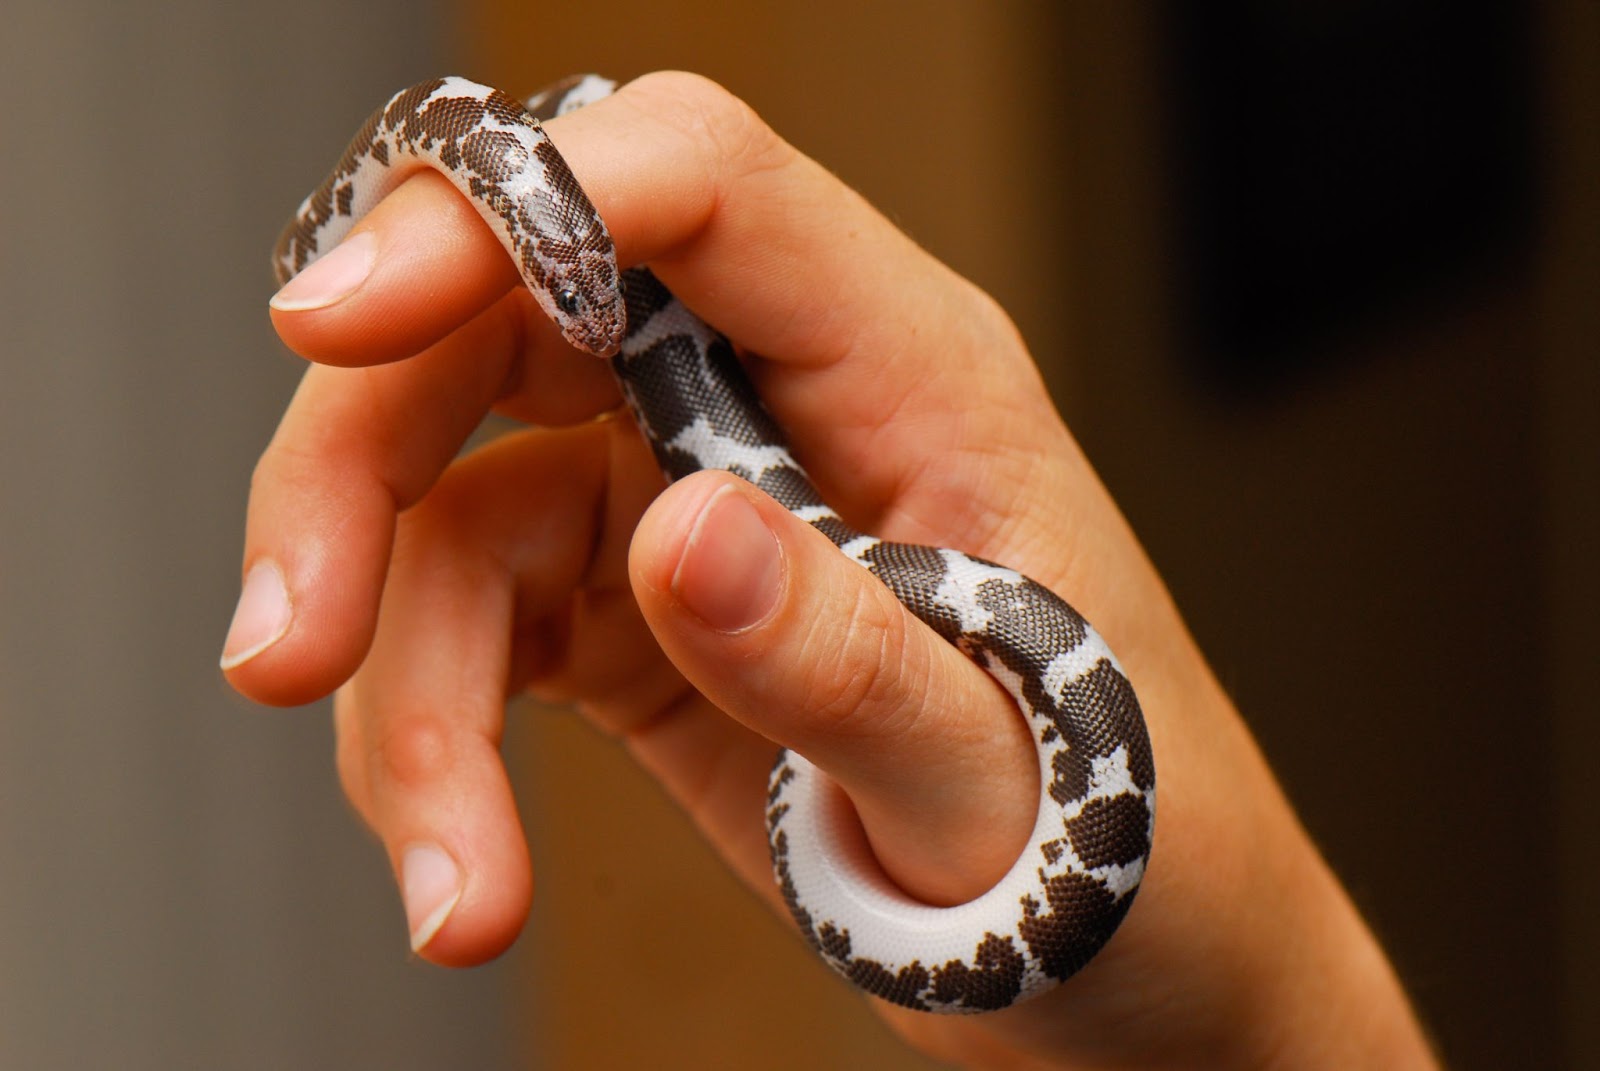 Kenyan sand boa on person's hand